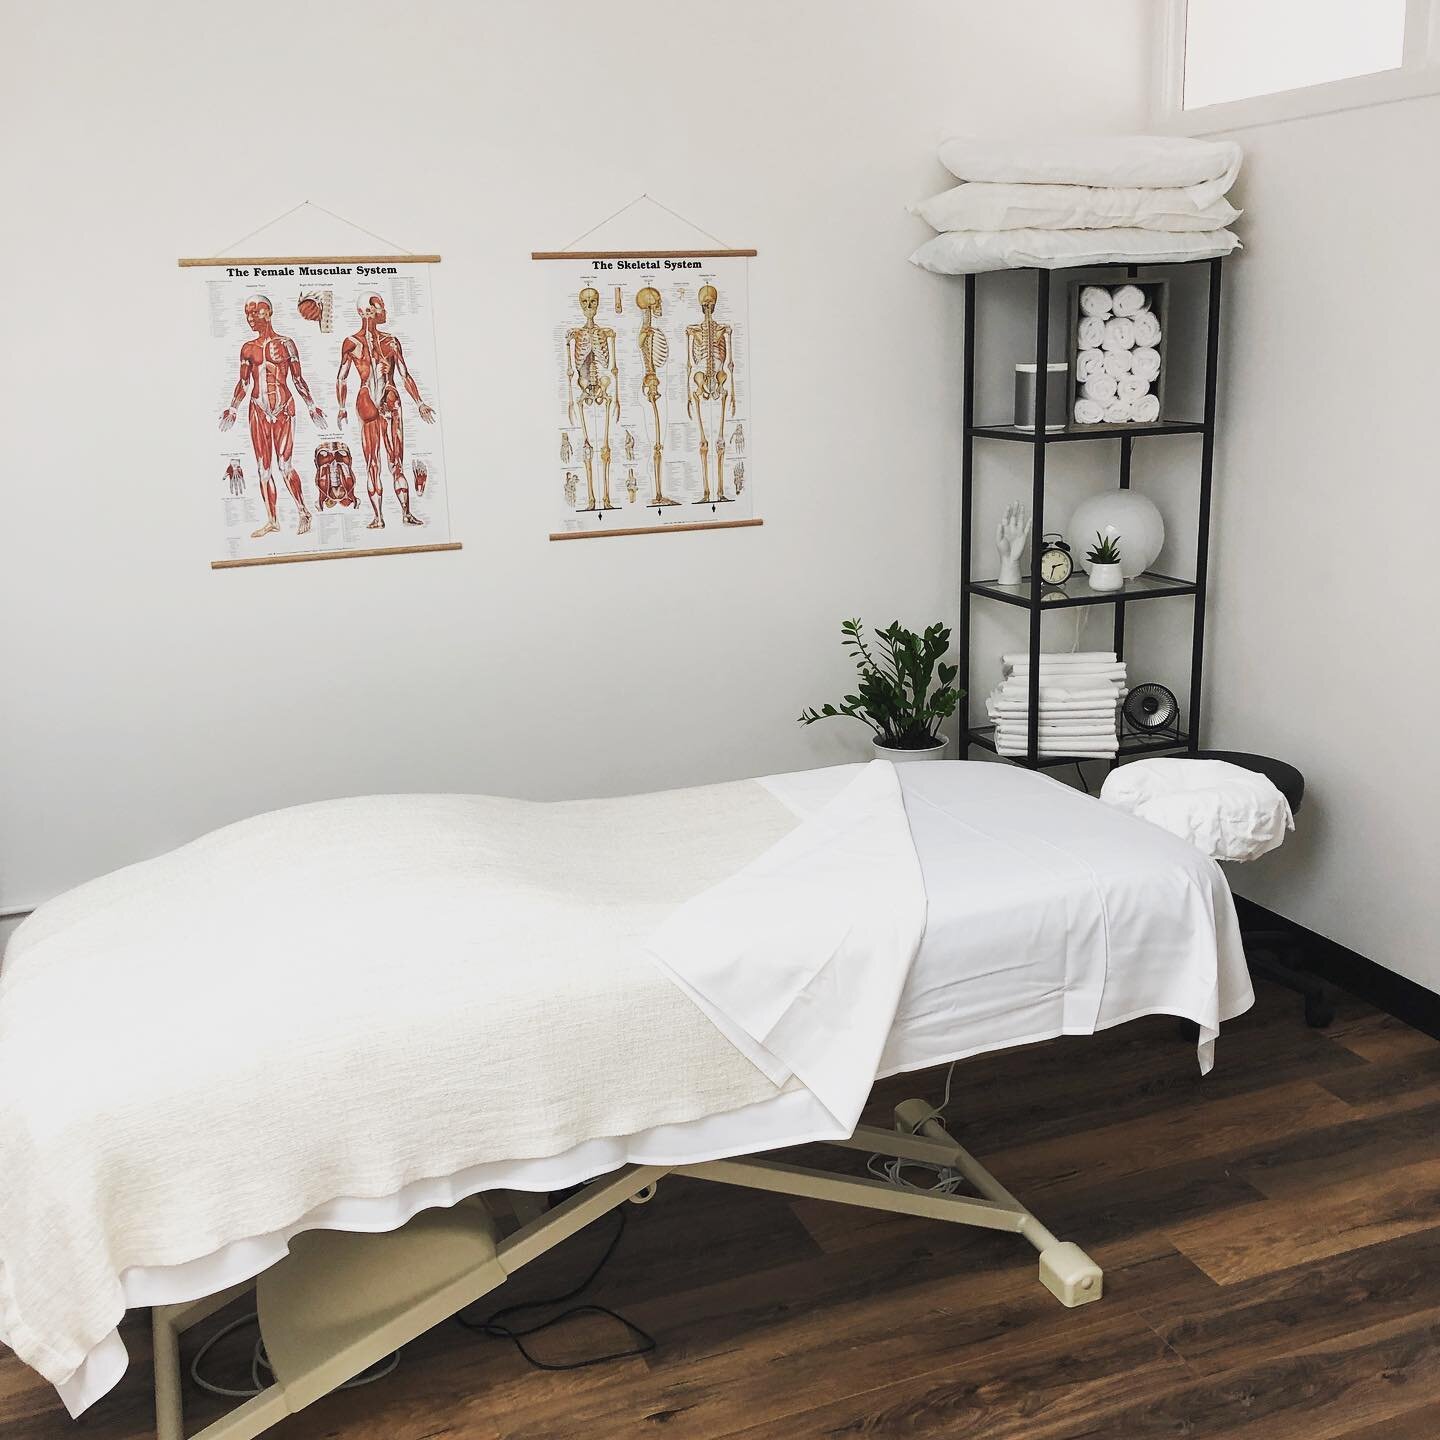 One more appointment time to squeeze in today on today&rsquo;s holiday Monday @rmtstudio. Link in bio to book. .
.
.
.
#massage #massagetherapy #massagetherapist #wellness #backpain #kingstreetwest